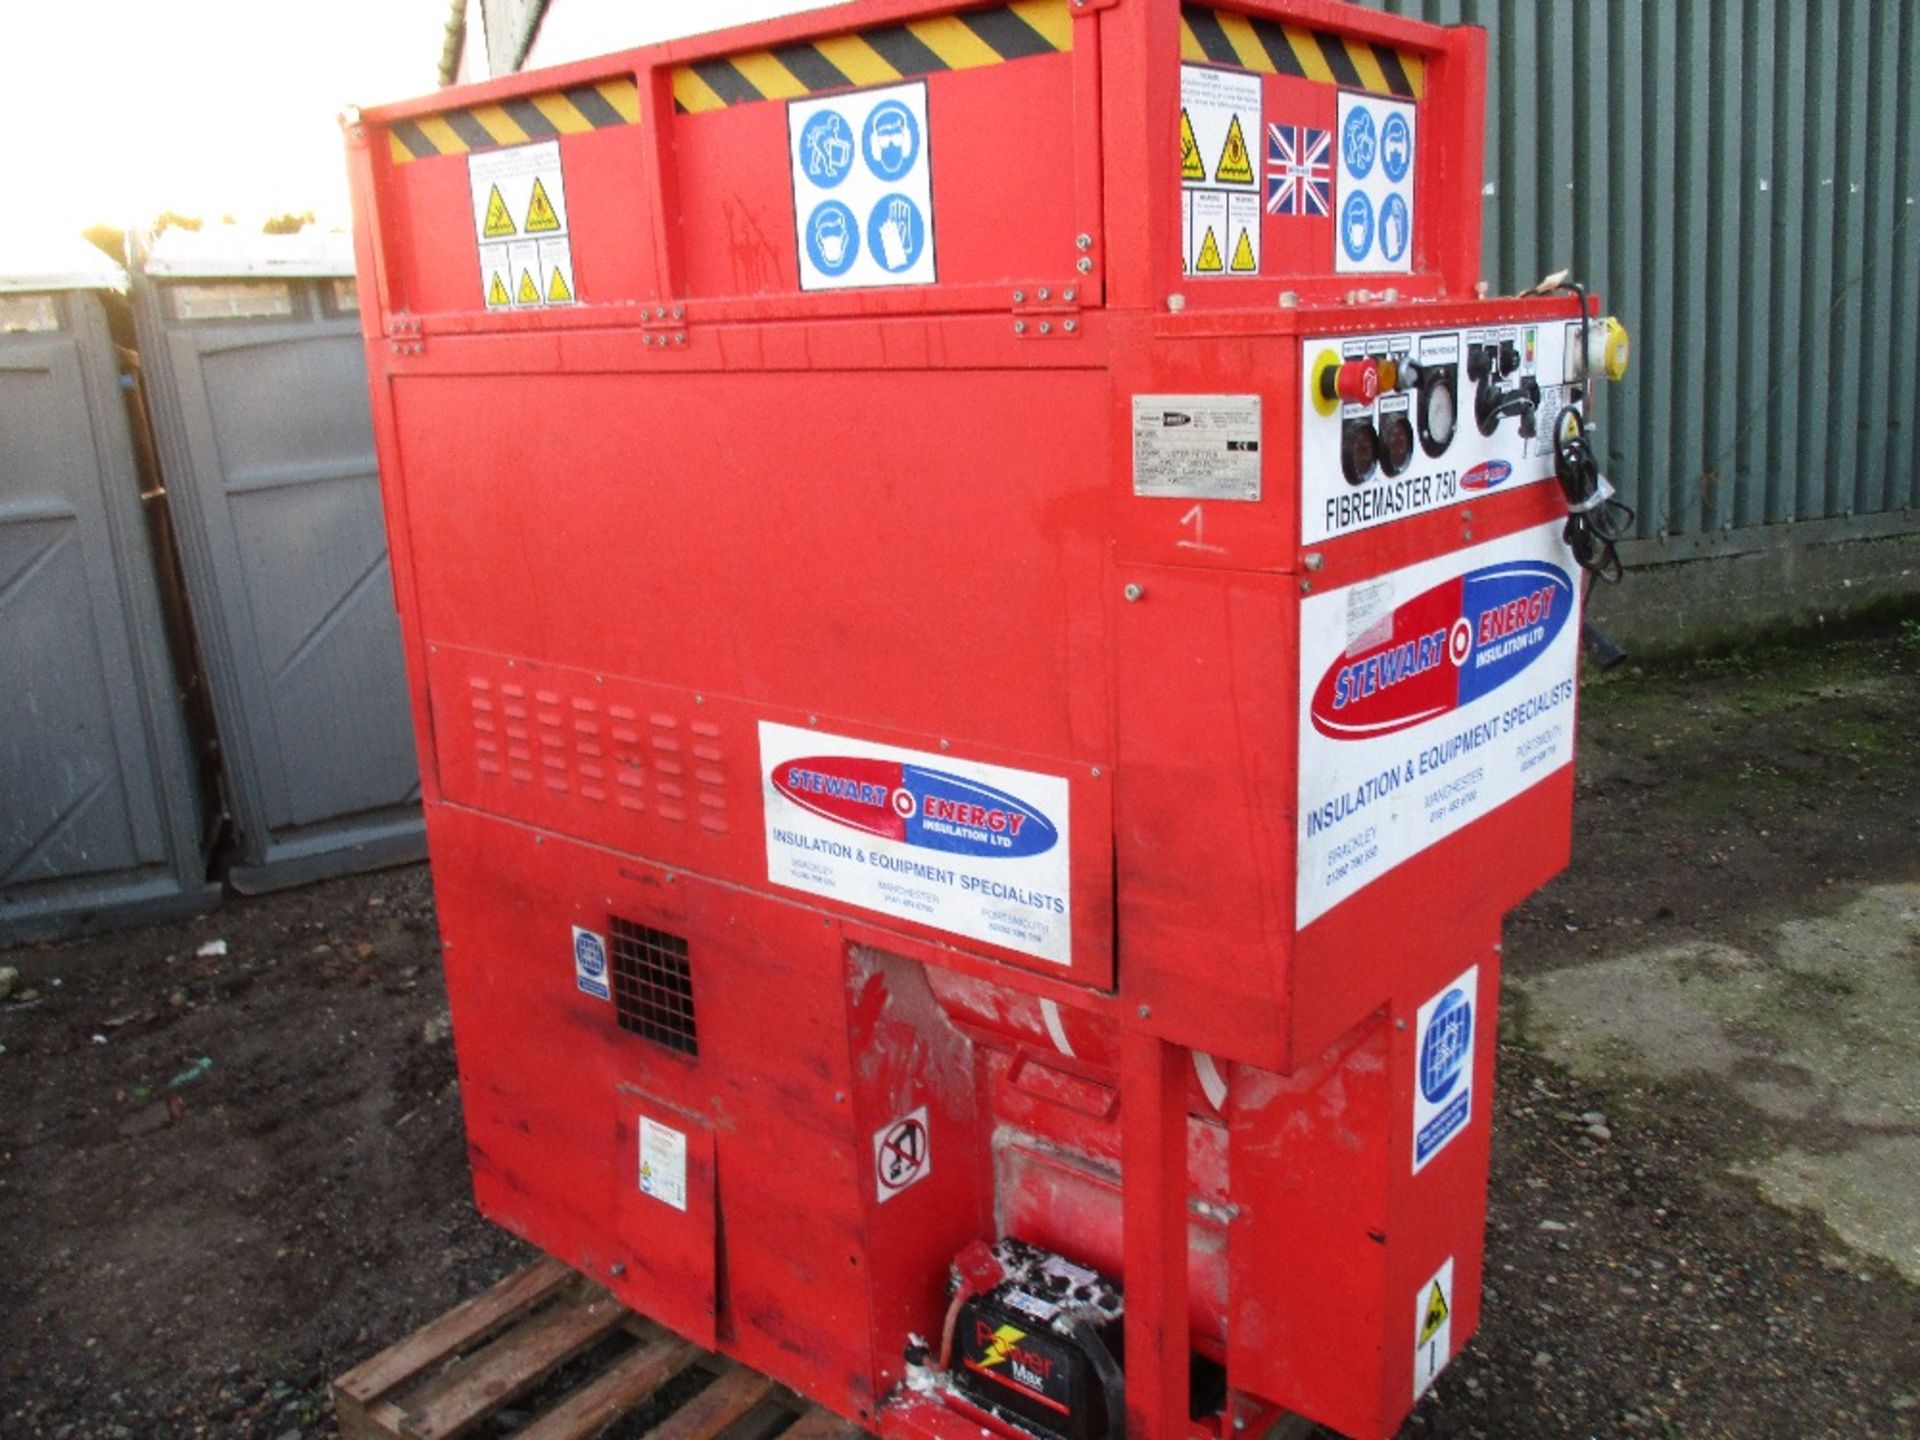 Stewart Energy Lister engined blown insulation machine sourced from company liquidation.